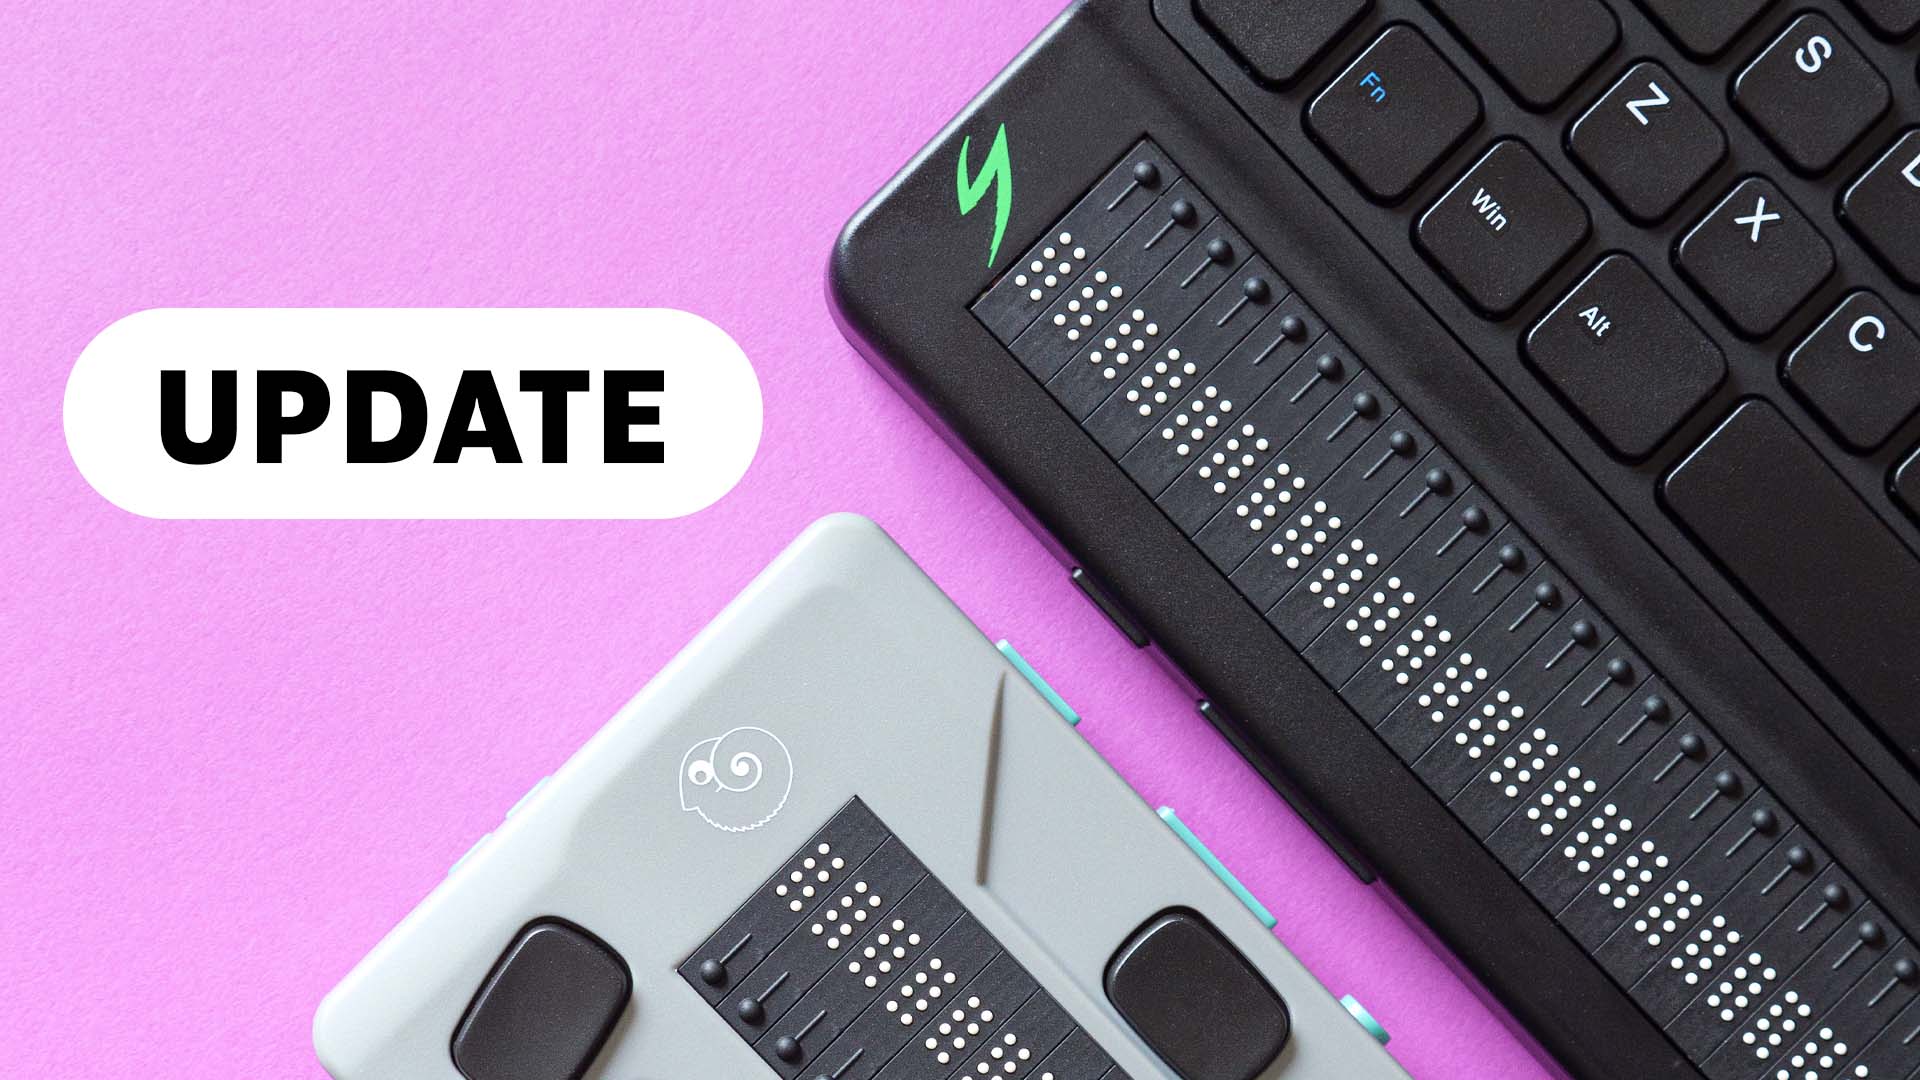 mantis and chameleon devices are partially shown, sitting side-by-side and diagonal on a purple background. the word "update" is in a white bubble on the left side